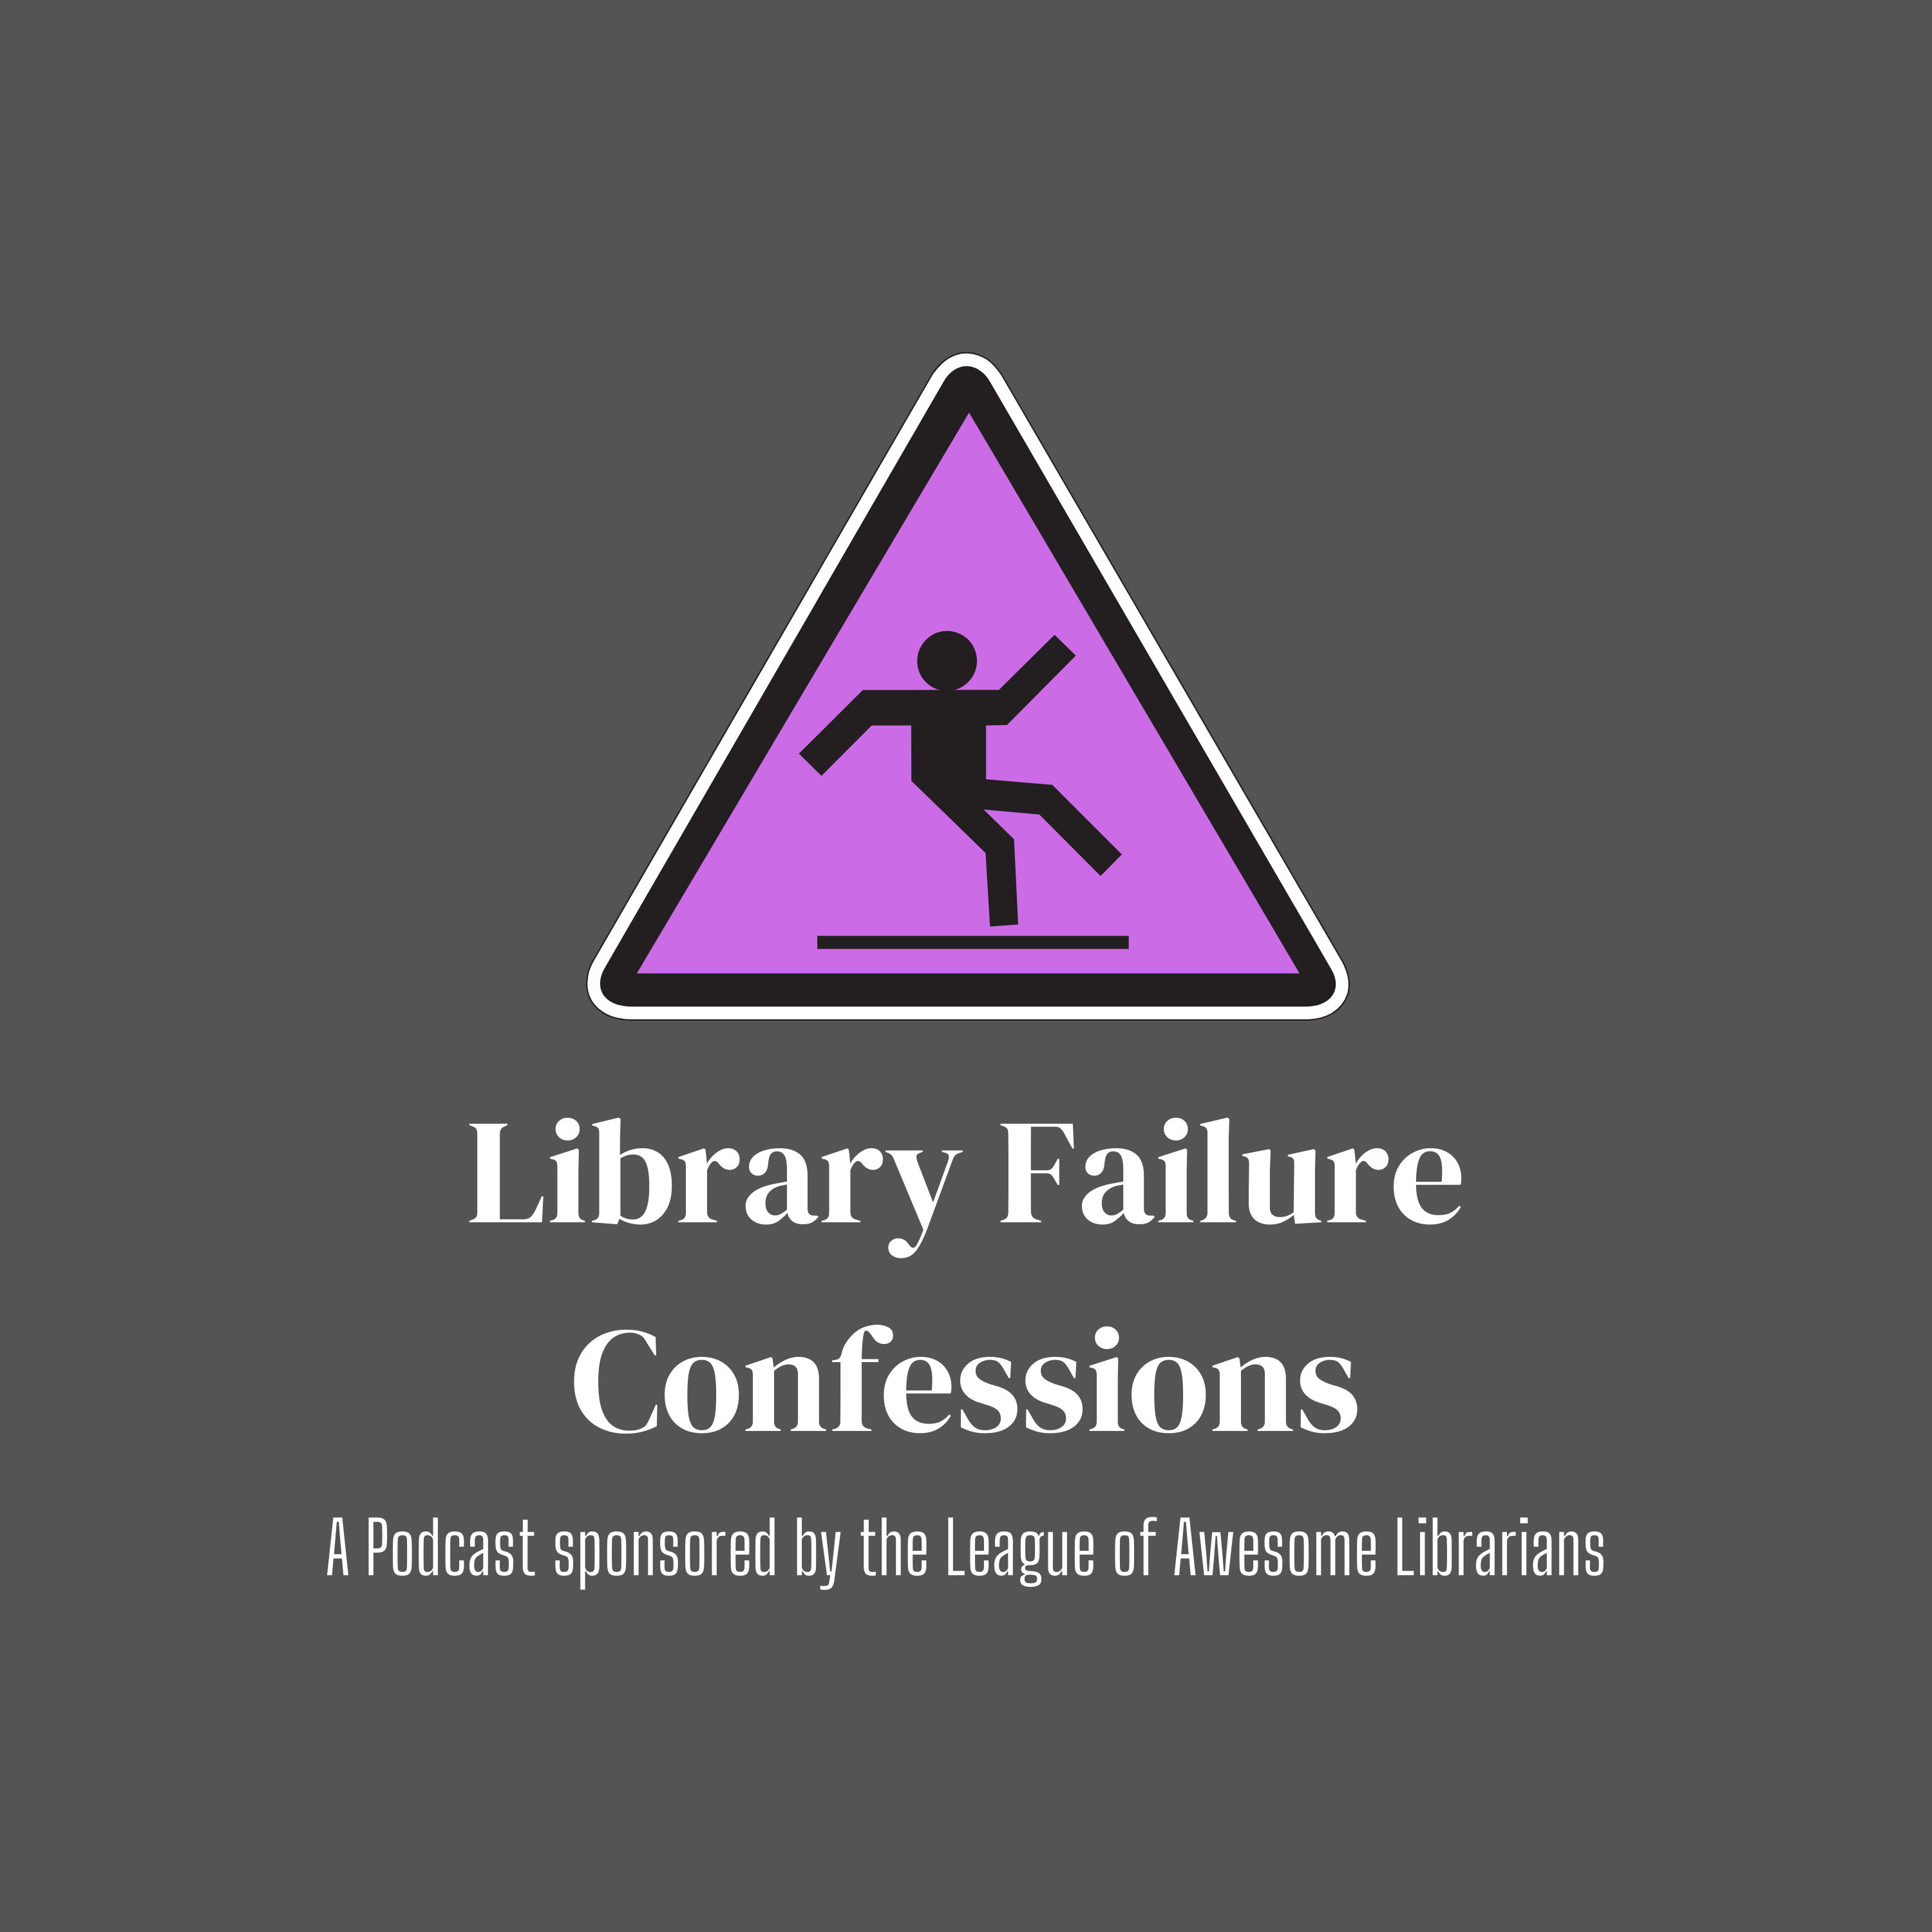 Library Failure Confessions